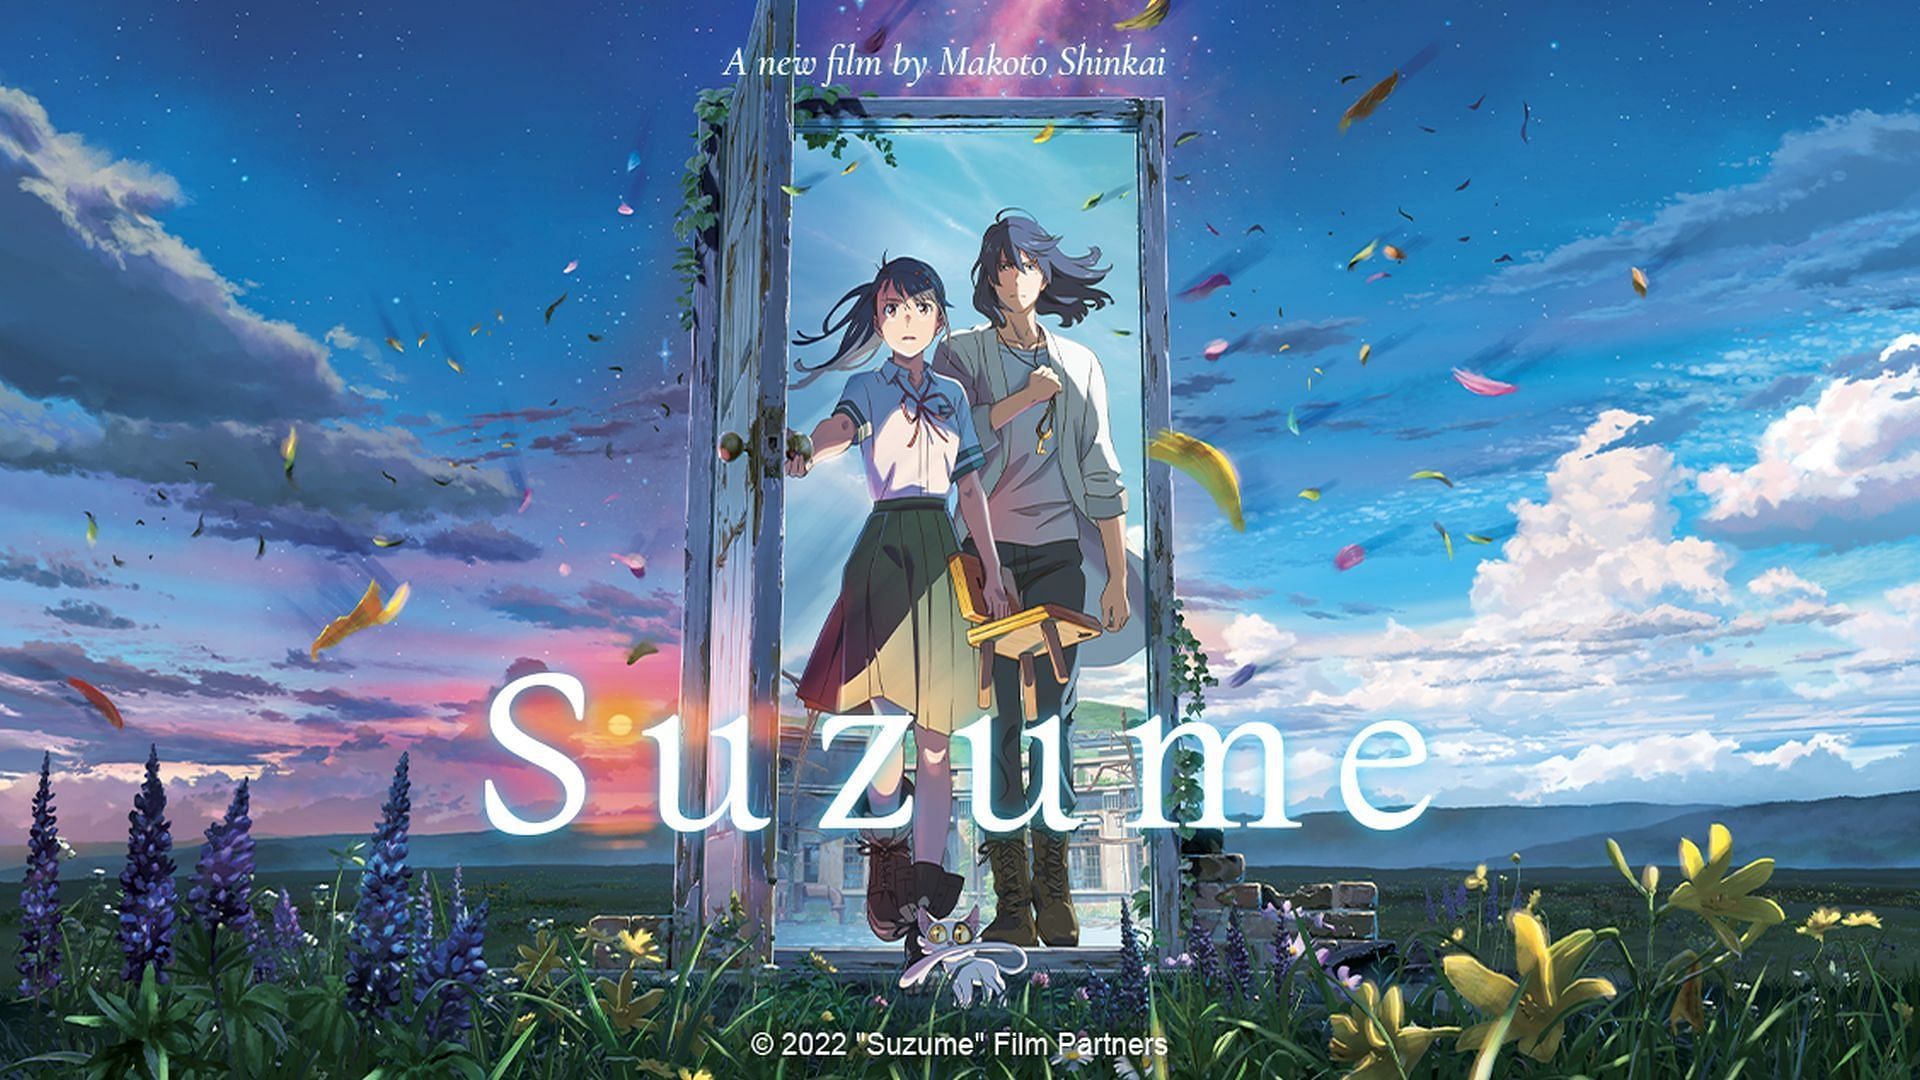 The Suzume English dub cast list is revealed, highlighting a shocking casting choice for the film